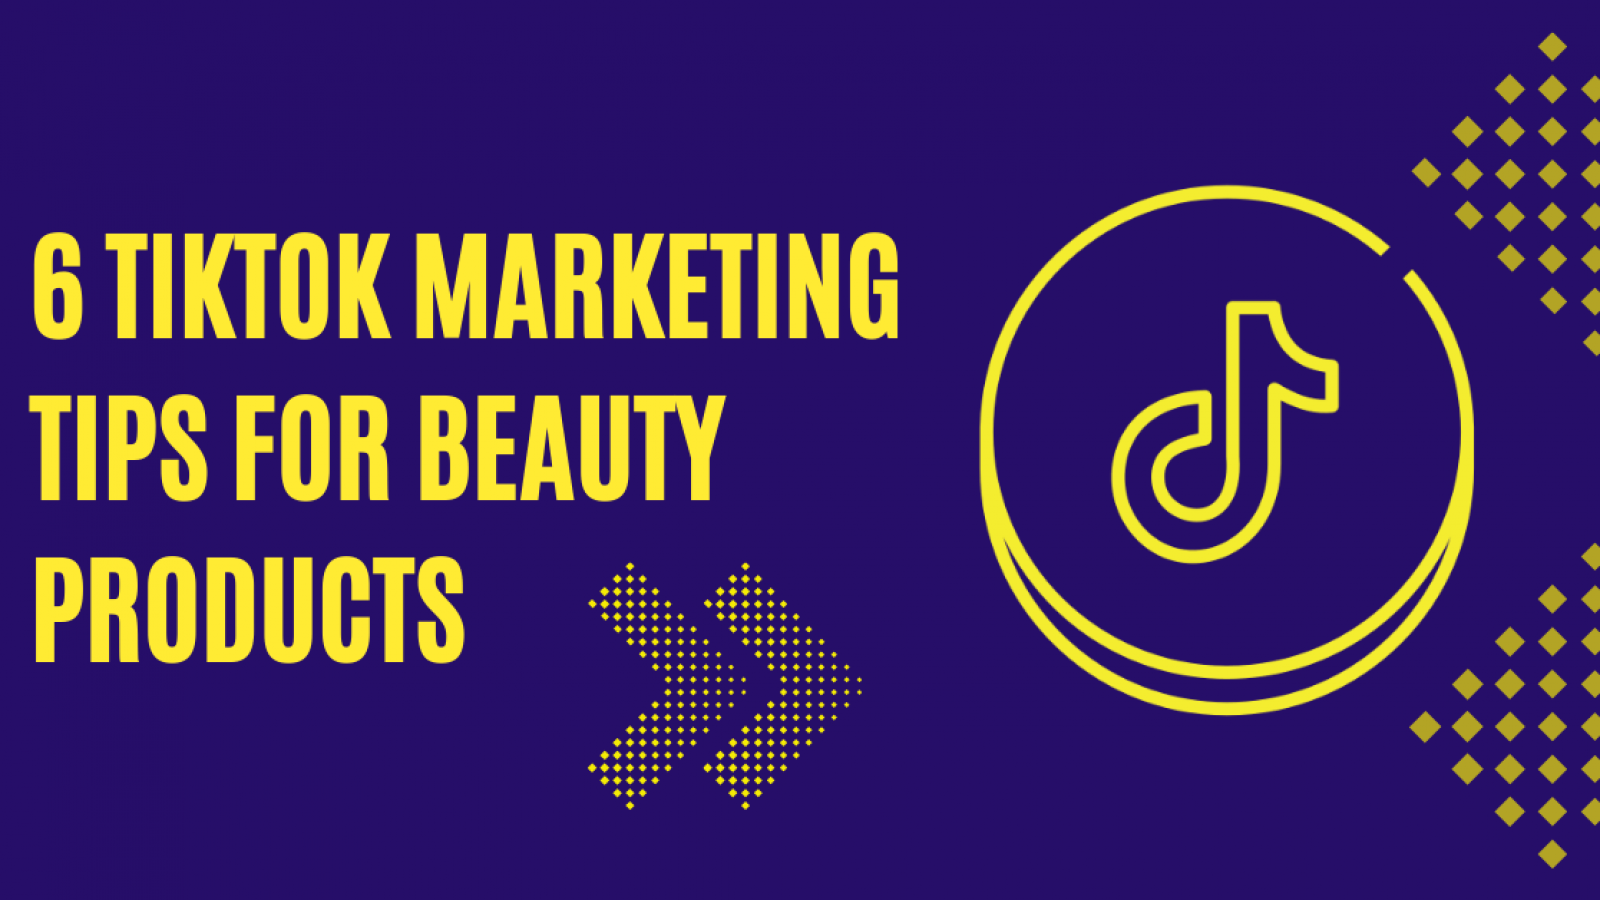 6 TikTok Marketing Tips For Beauty Products